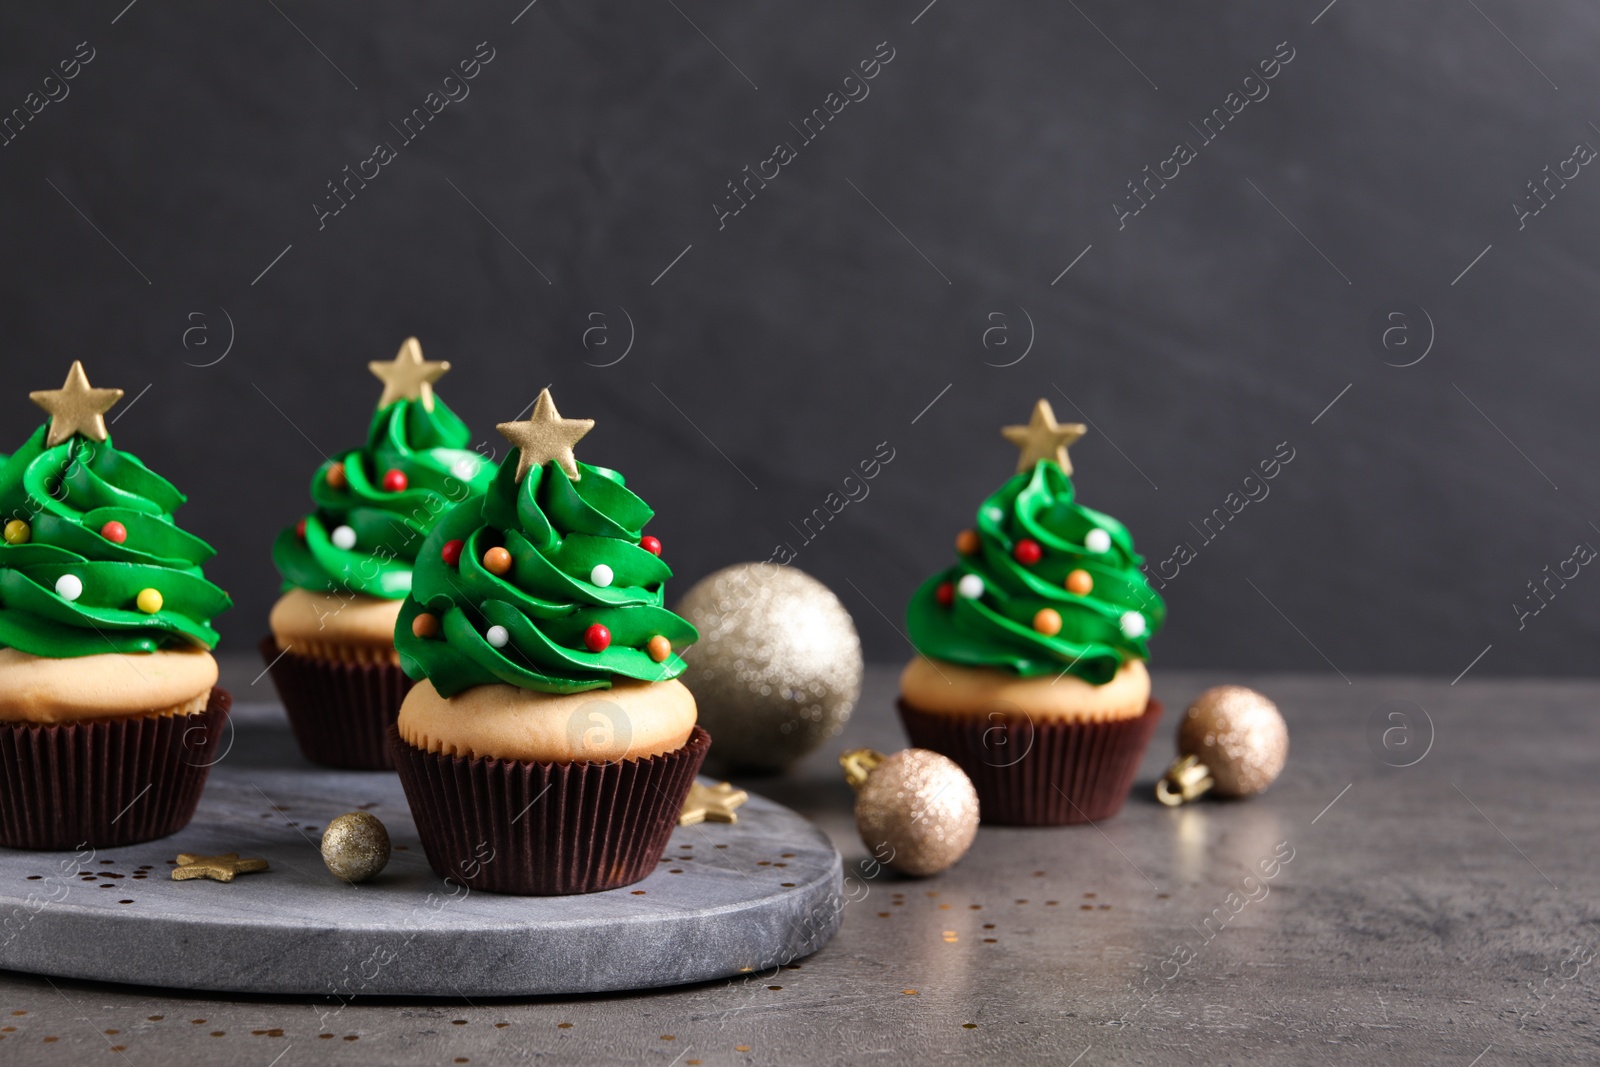 Photo of Christmas tree shaped cupcakes on grey table